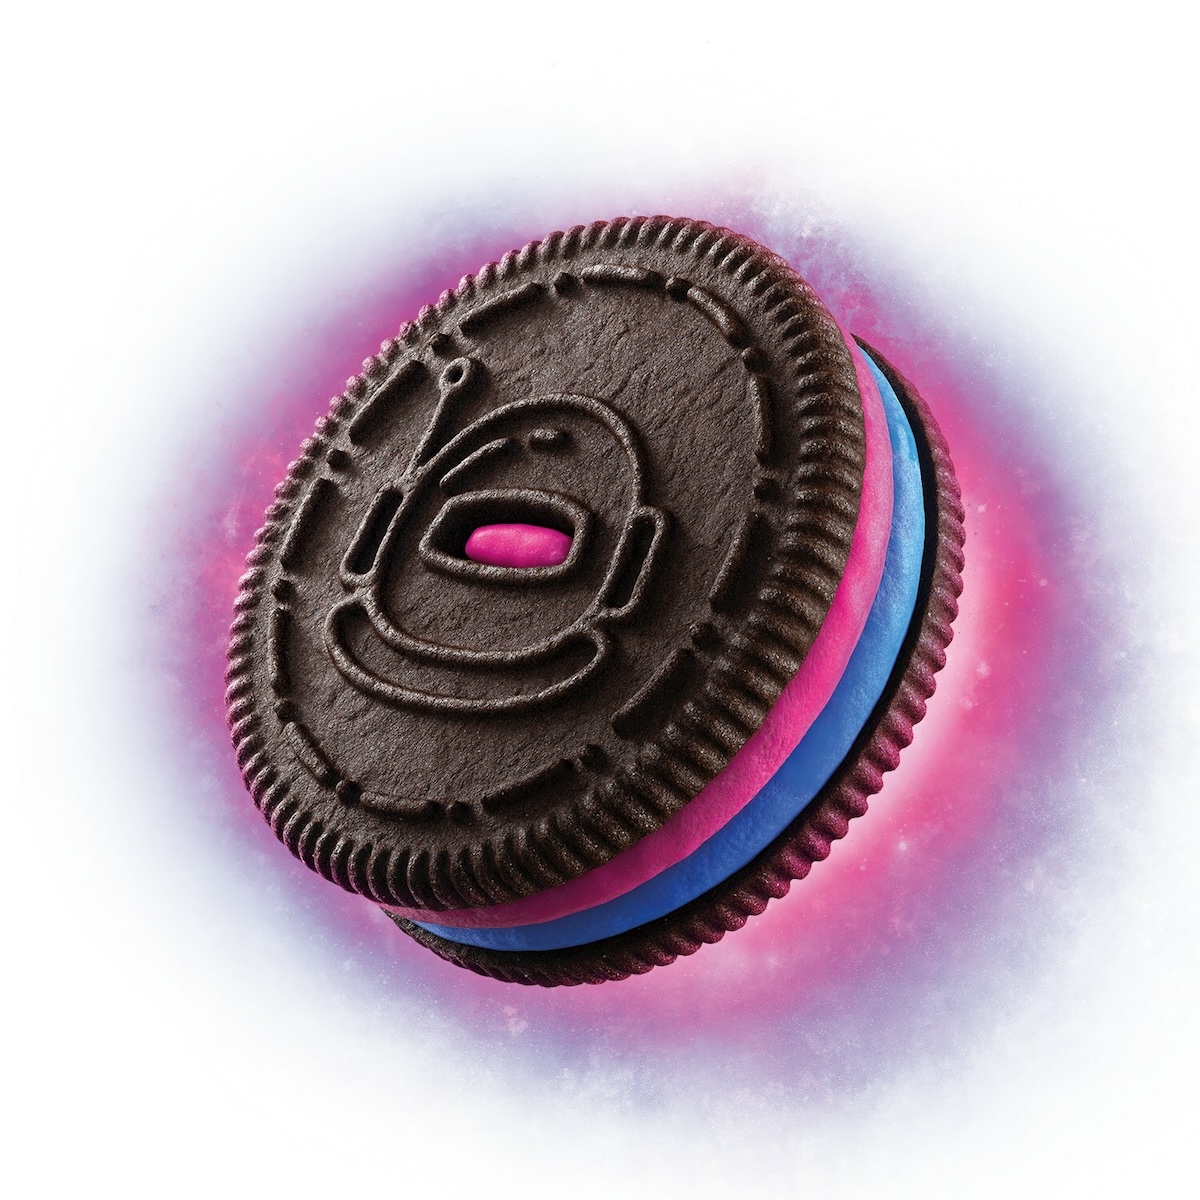 Oreo Announces a New Cookie Flavor That's Stuffed With Pink and Blue Creme